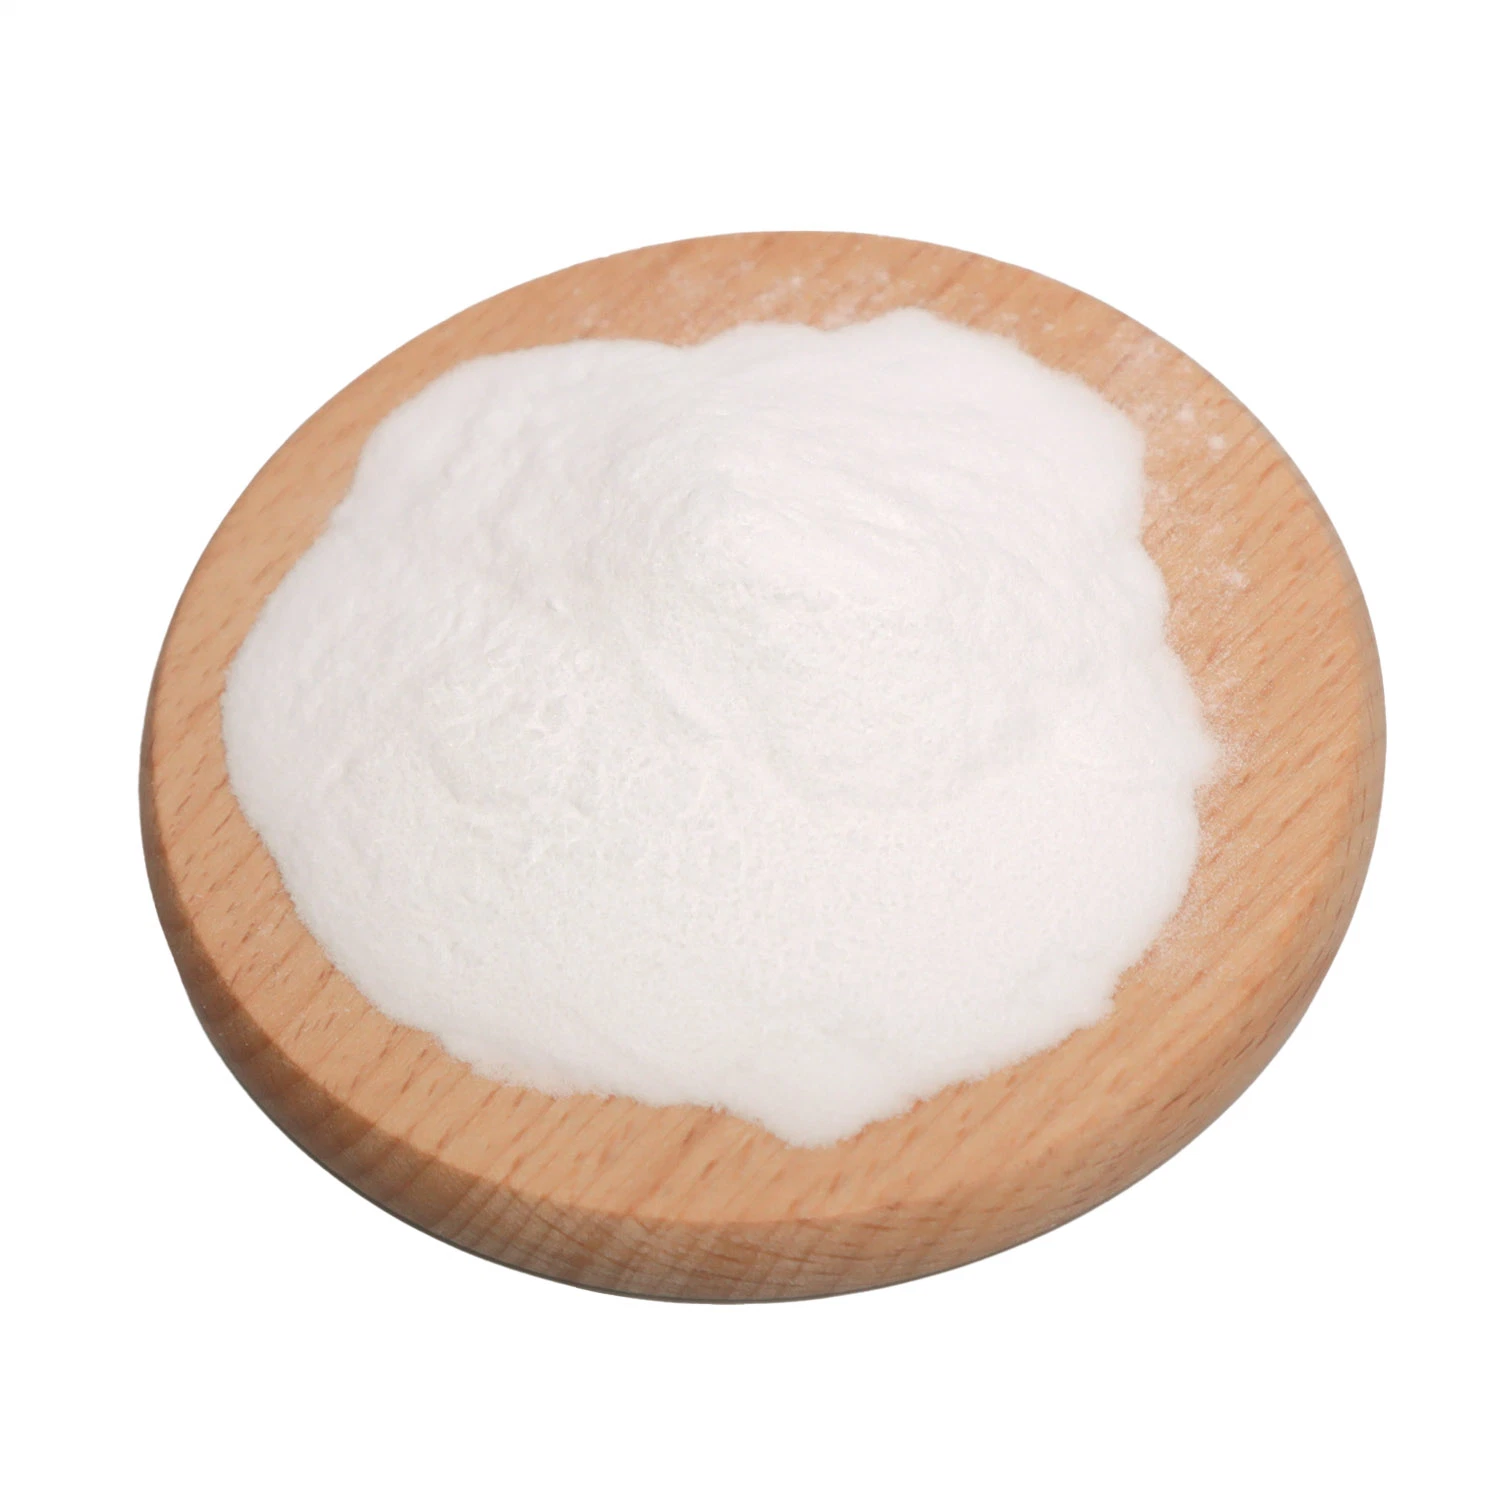 CMC Food Grade for Chemical Raw Carboxy Methyl Cellulose Sodium Wholesale/Supplier CMC for Construction Materials Hot Sale Additives